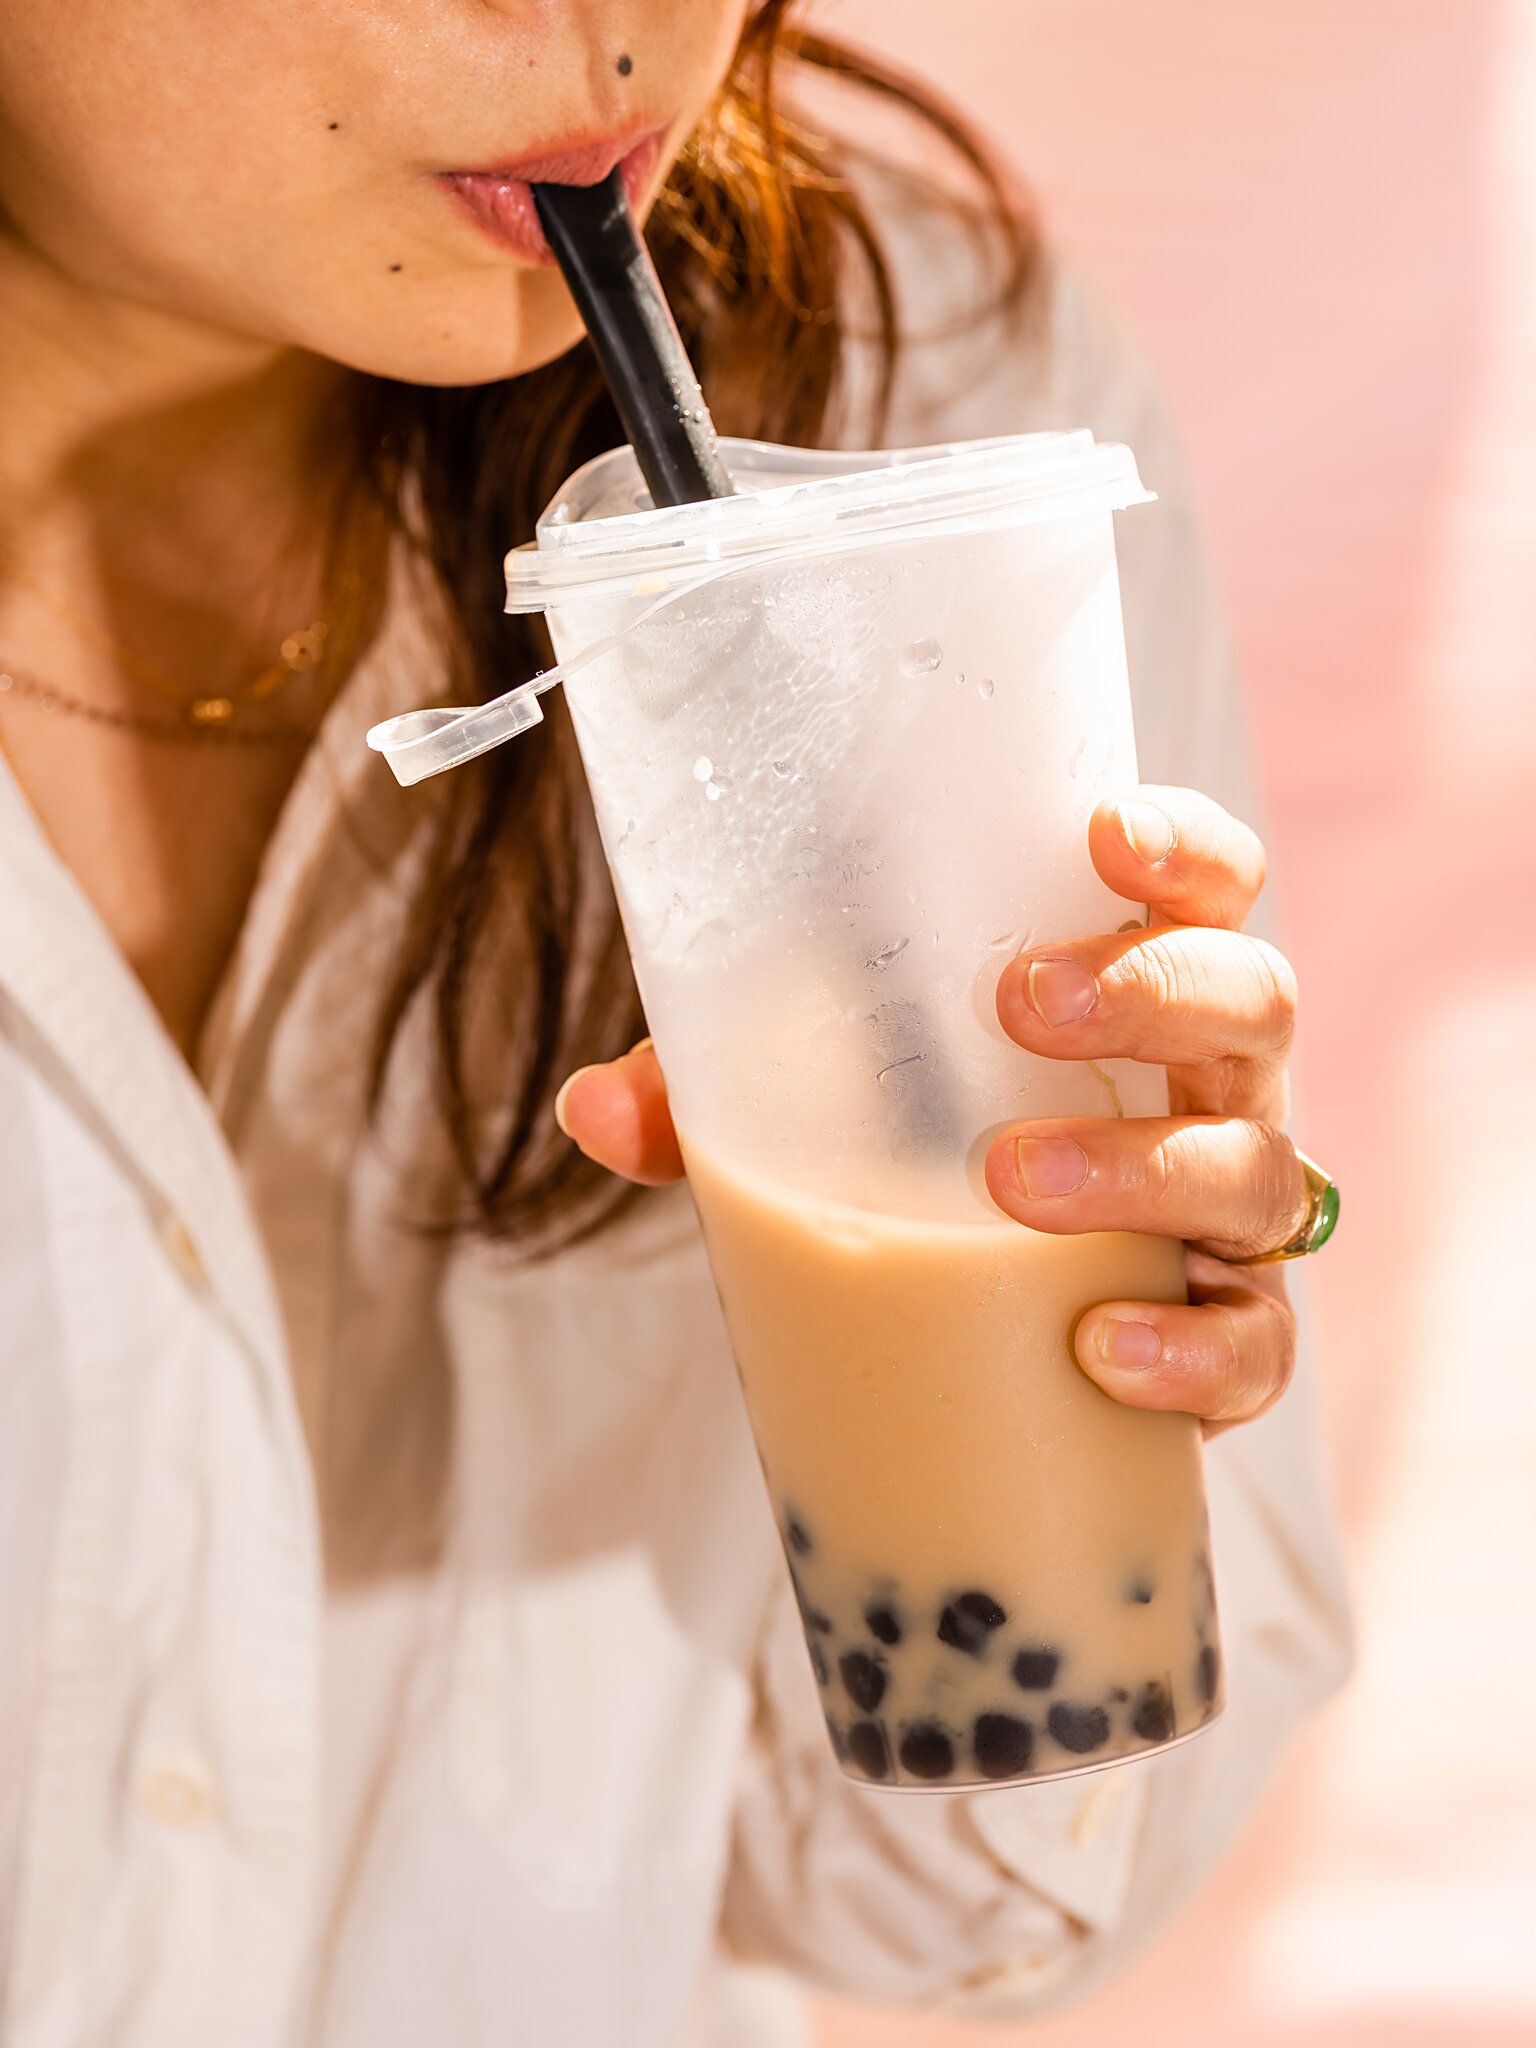 Another Unlikely Pandemic Shortage: Boba Tea